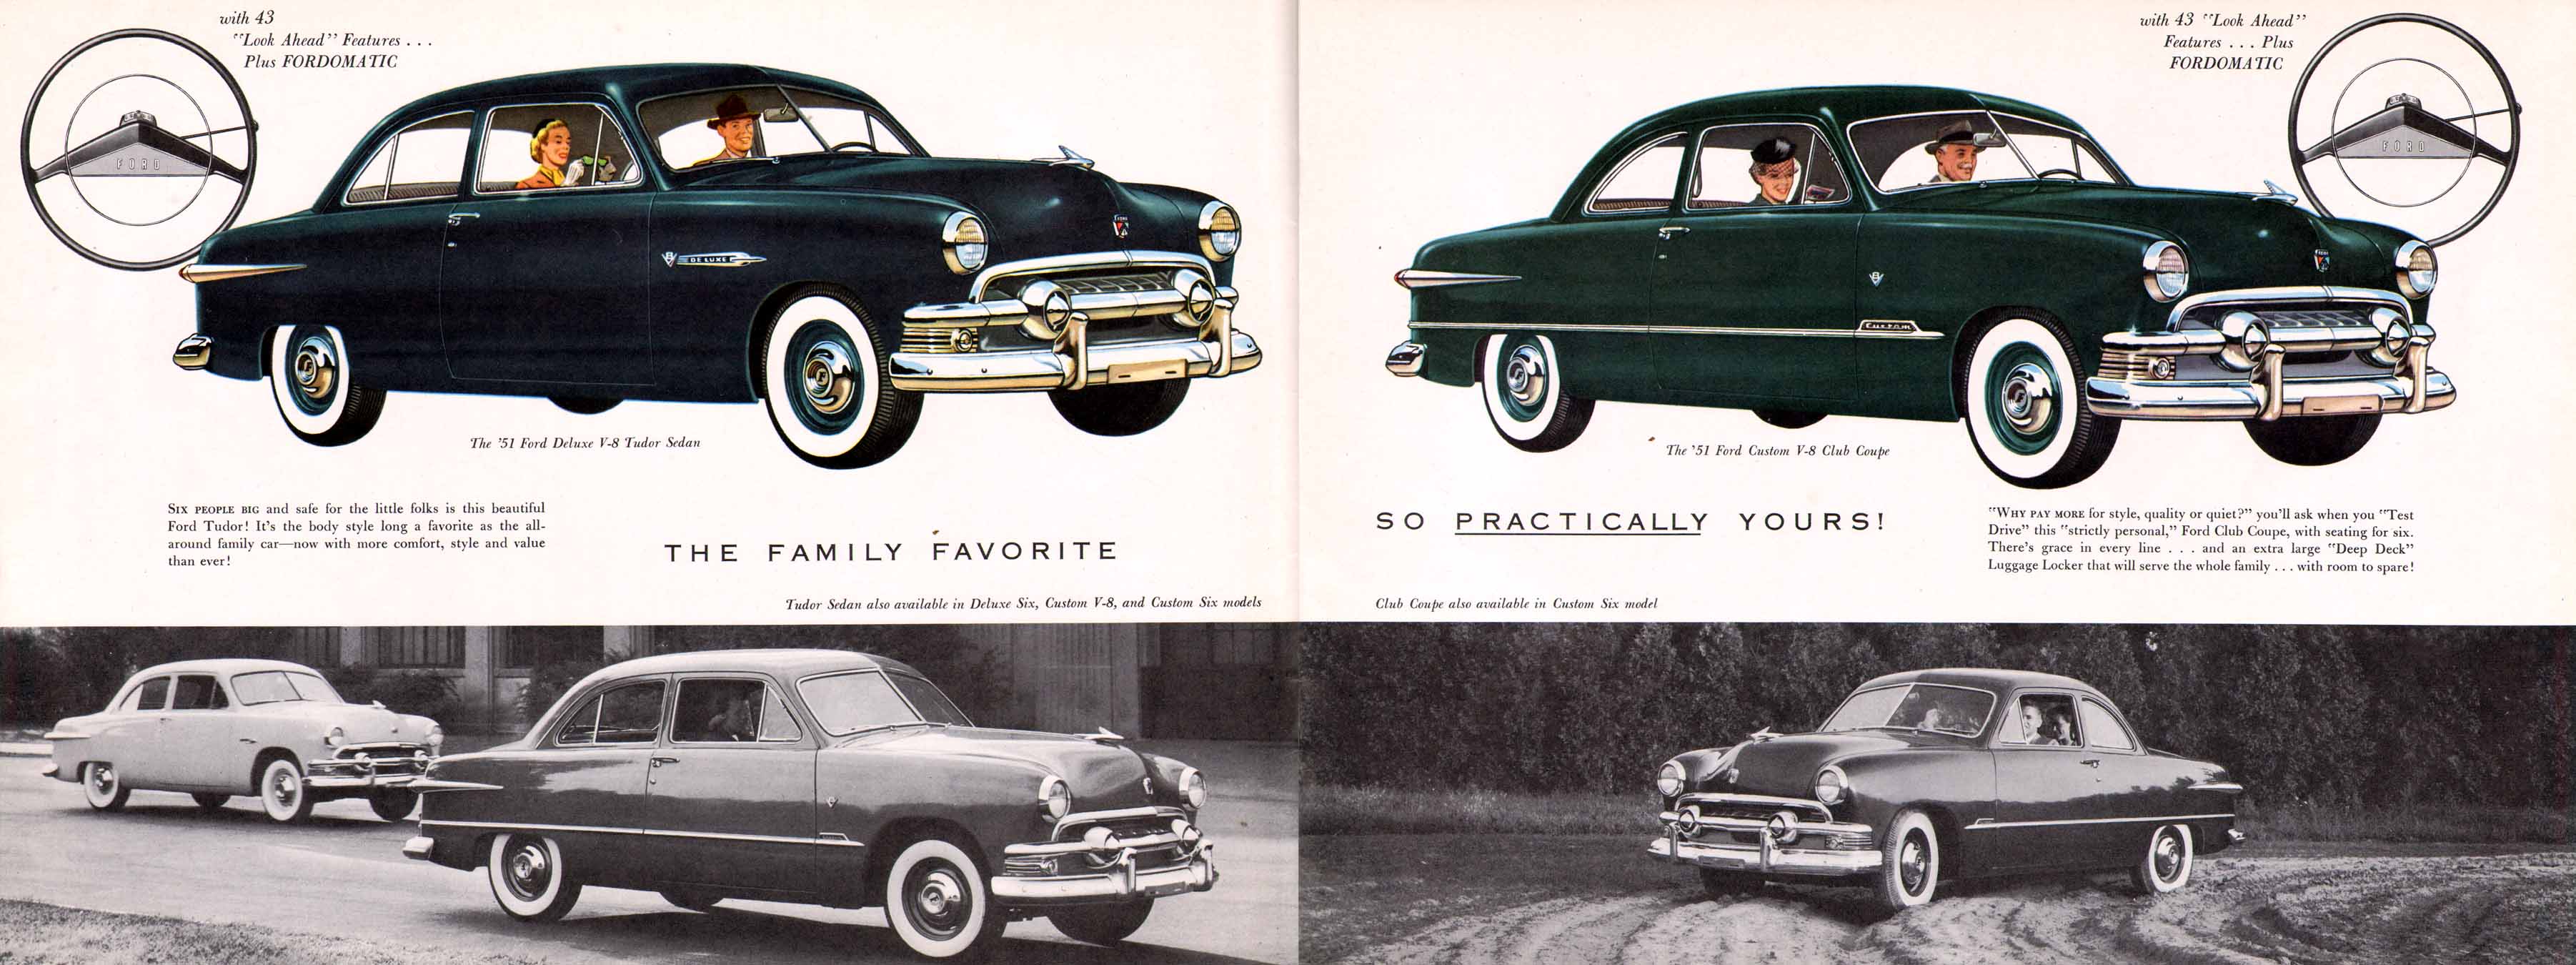 1951_Ford-12-13